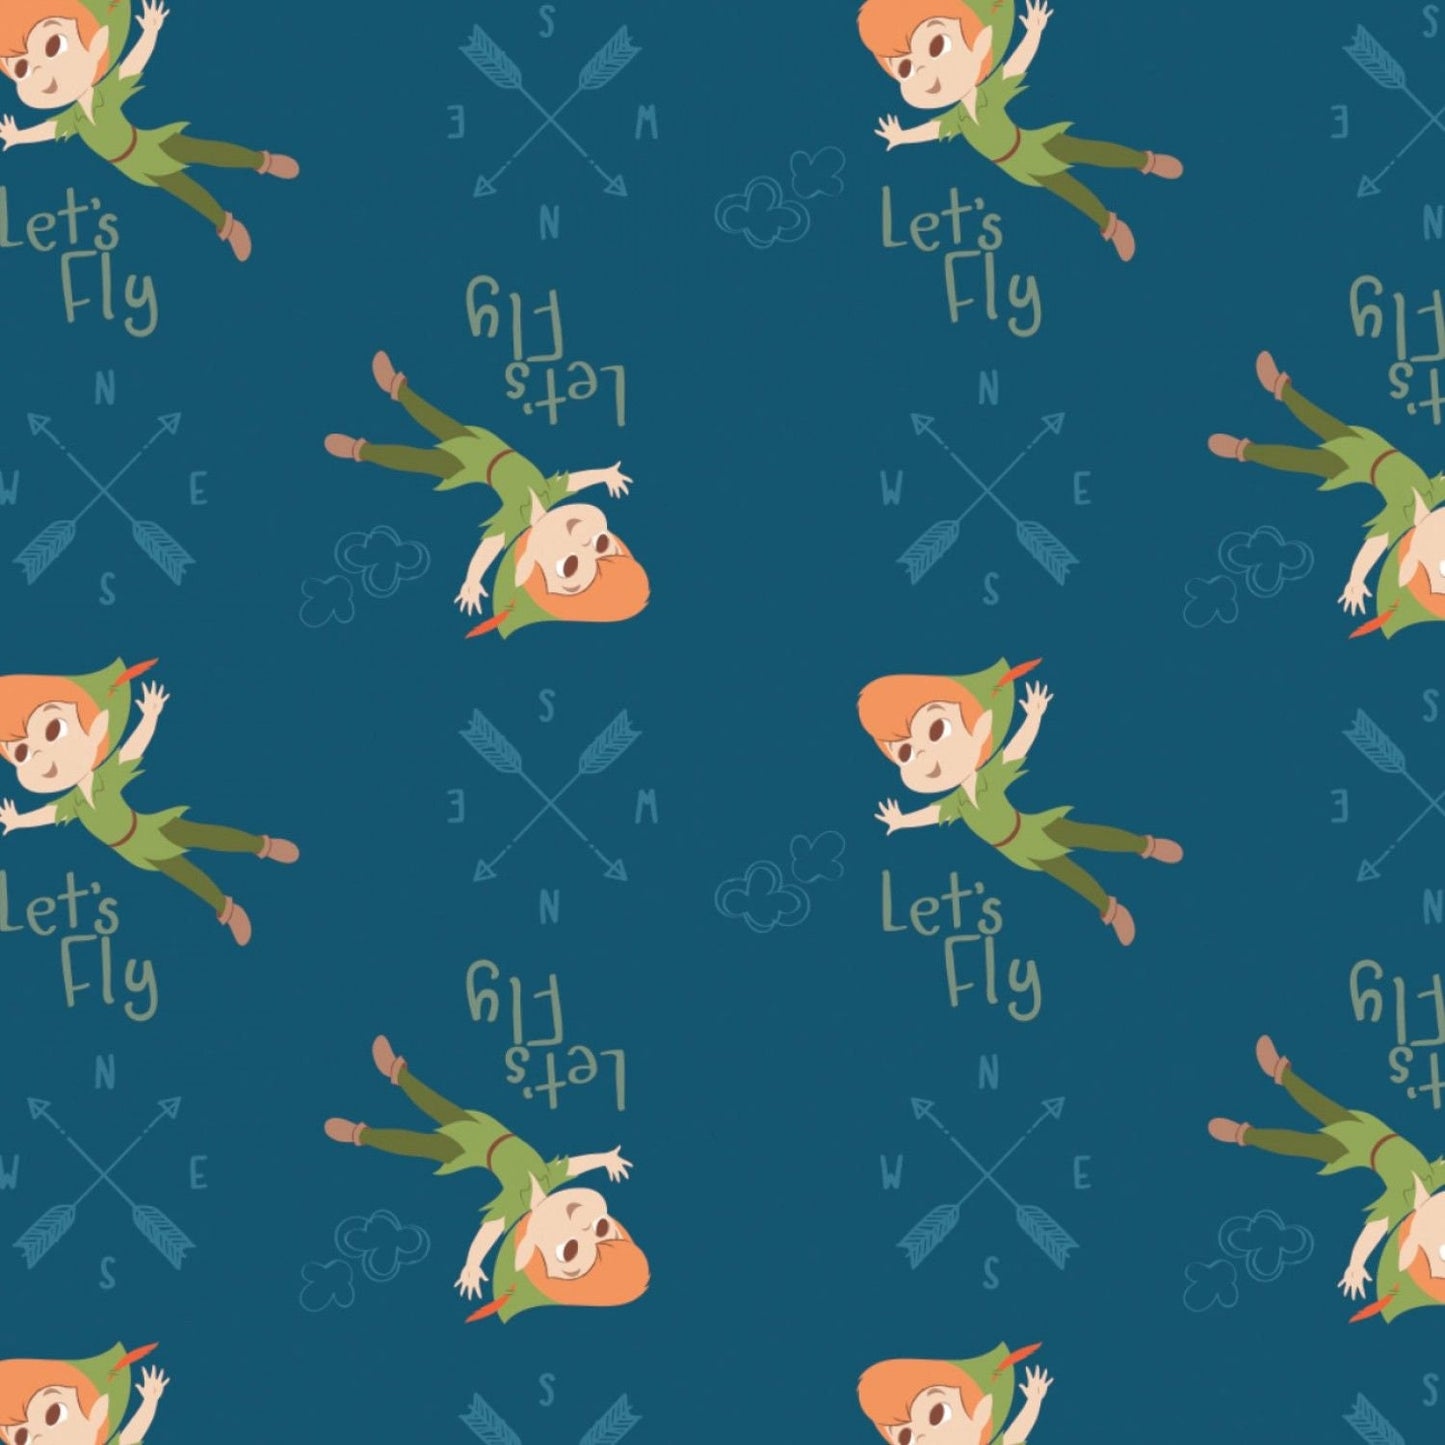 Peter Pan & Tinker Bell Peter Pan Let's Fly Blue 85330204-2 Cotton Woven Fabric